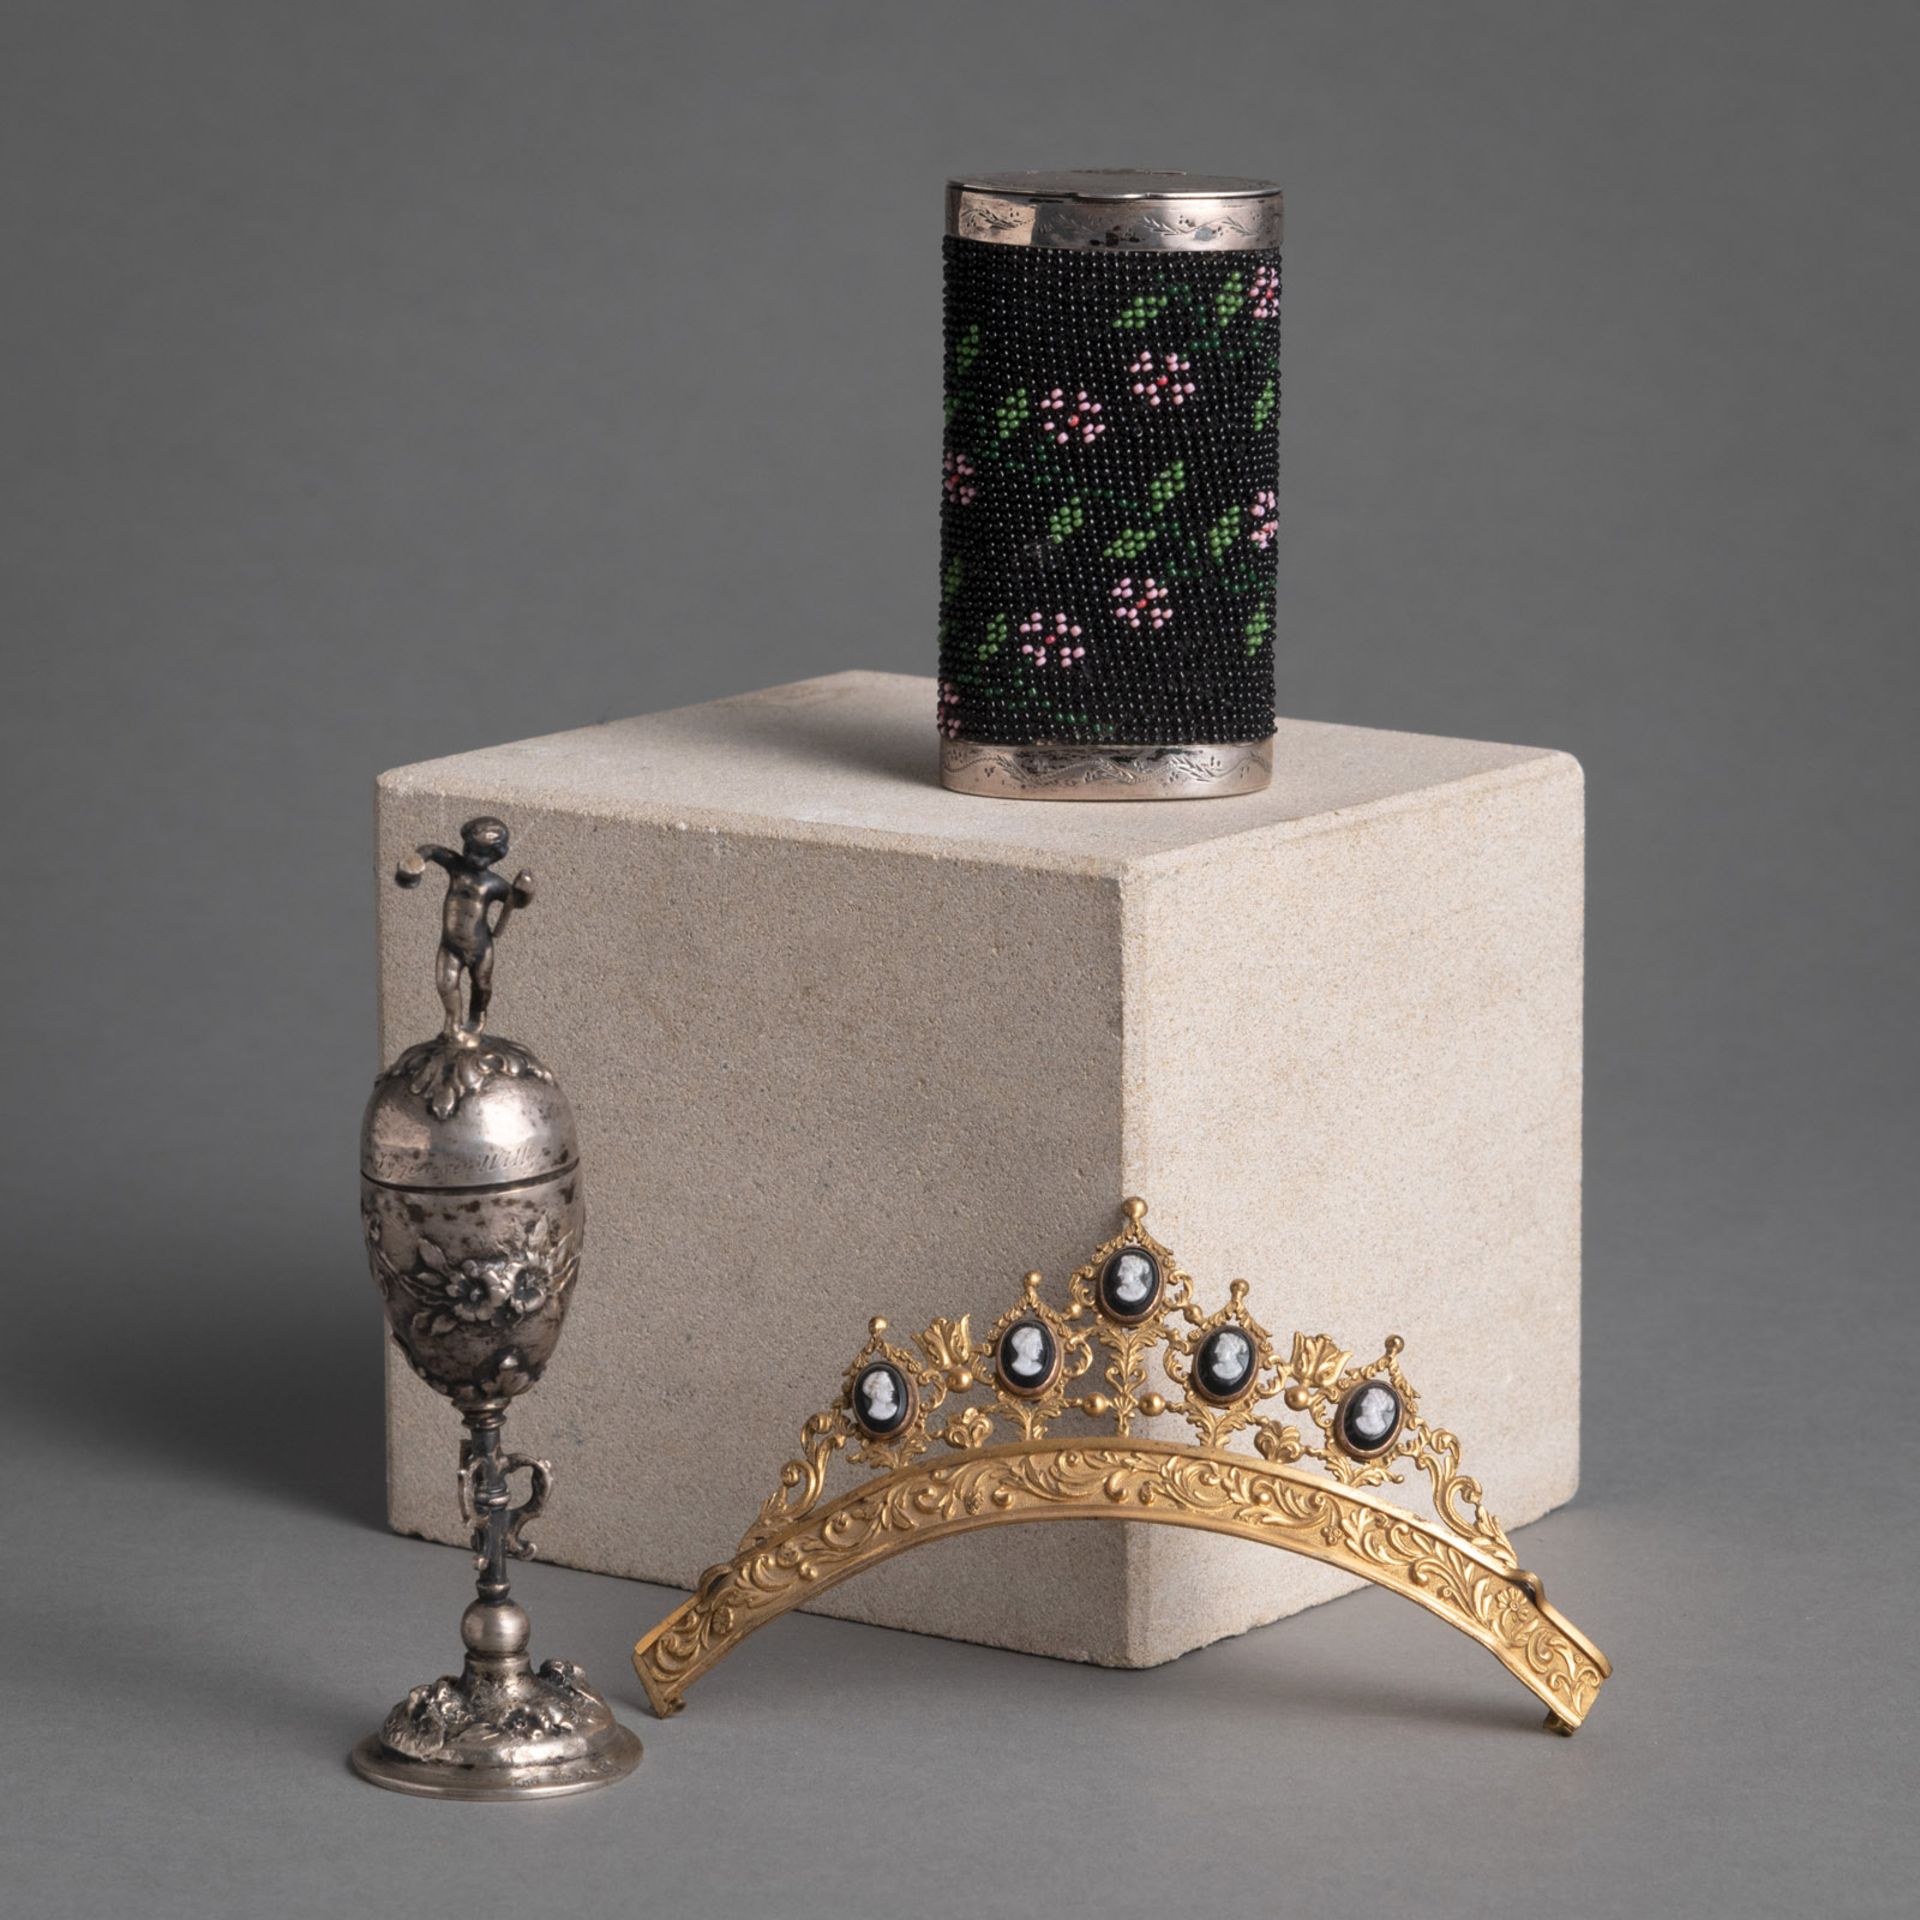 A TIARA, A MINIATURE CUP AND A SMALL CASE